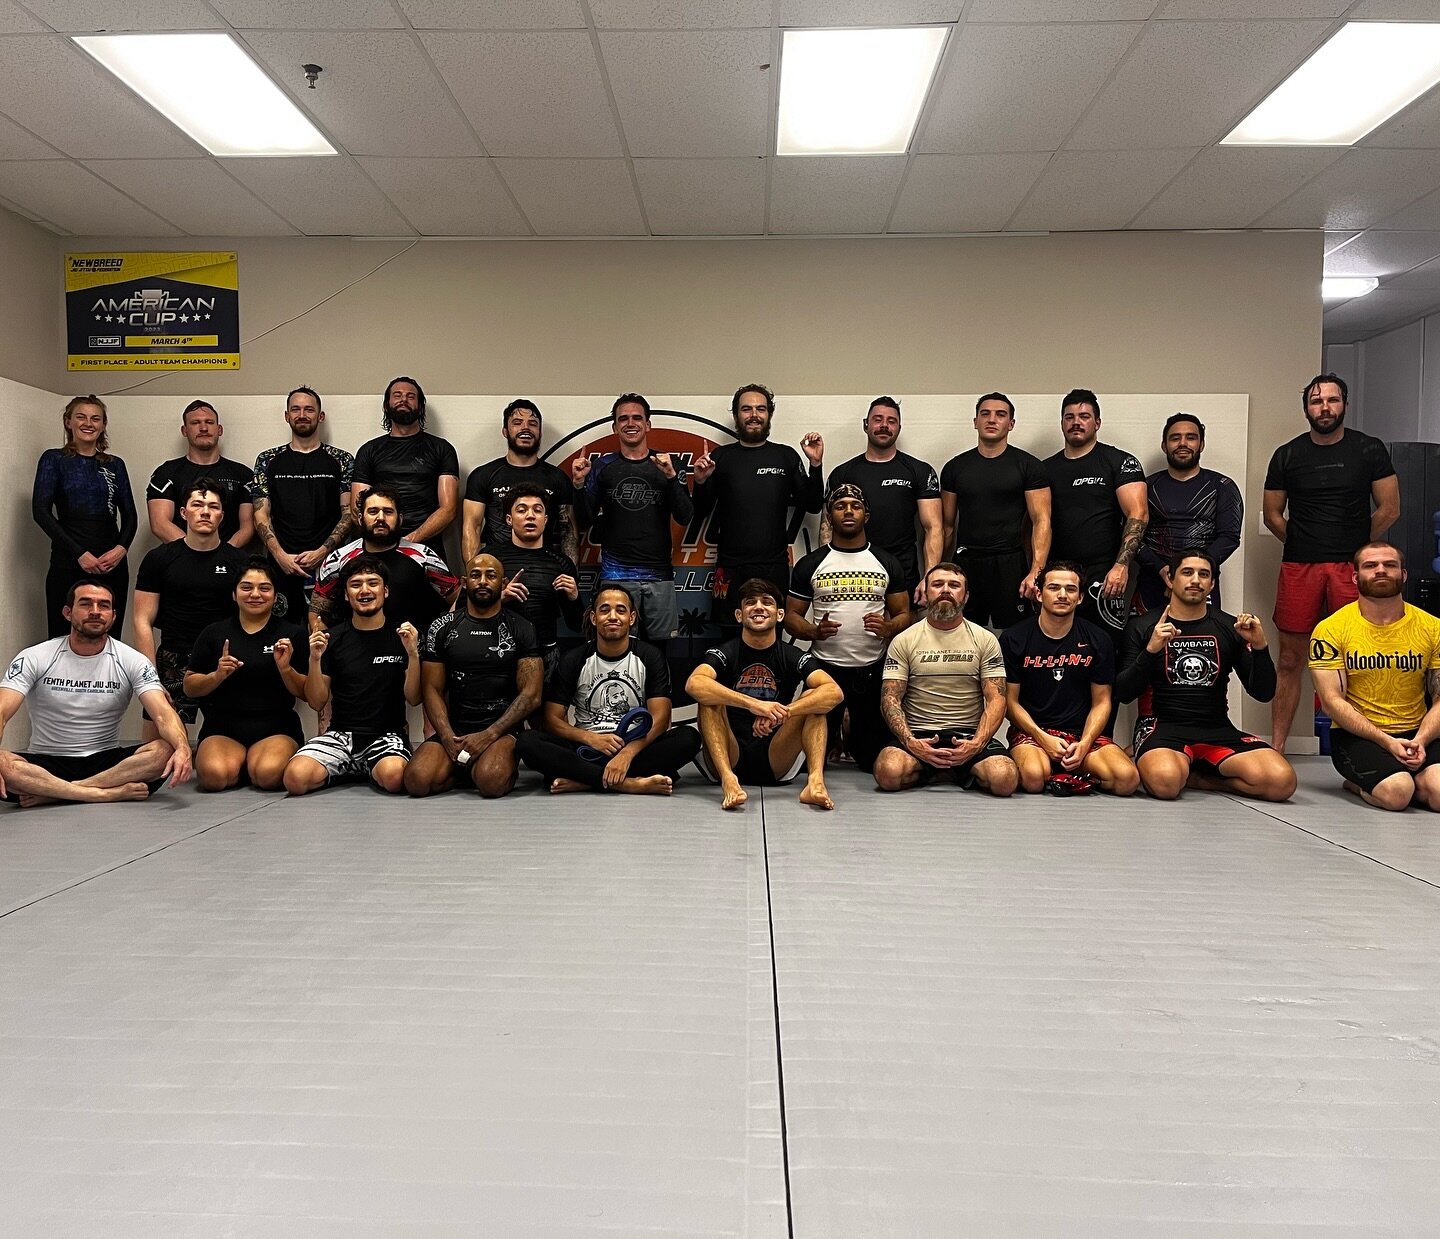 Another solid Monday night! Shout out to @whesley_gripes on the well deserved level up tonight, congrats brotha! 🟦🟦🟦⬛️⬛️🟦
#10PGVL #yeahTHATgreenville #10thplanetjiujitsu #nogi #gvltoday #greenvillesc #10WO